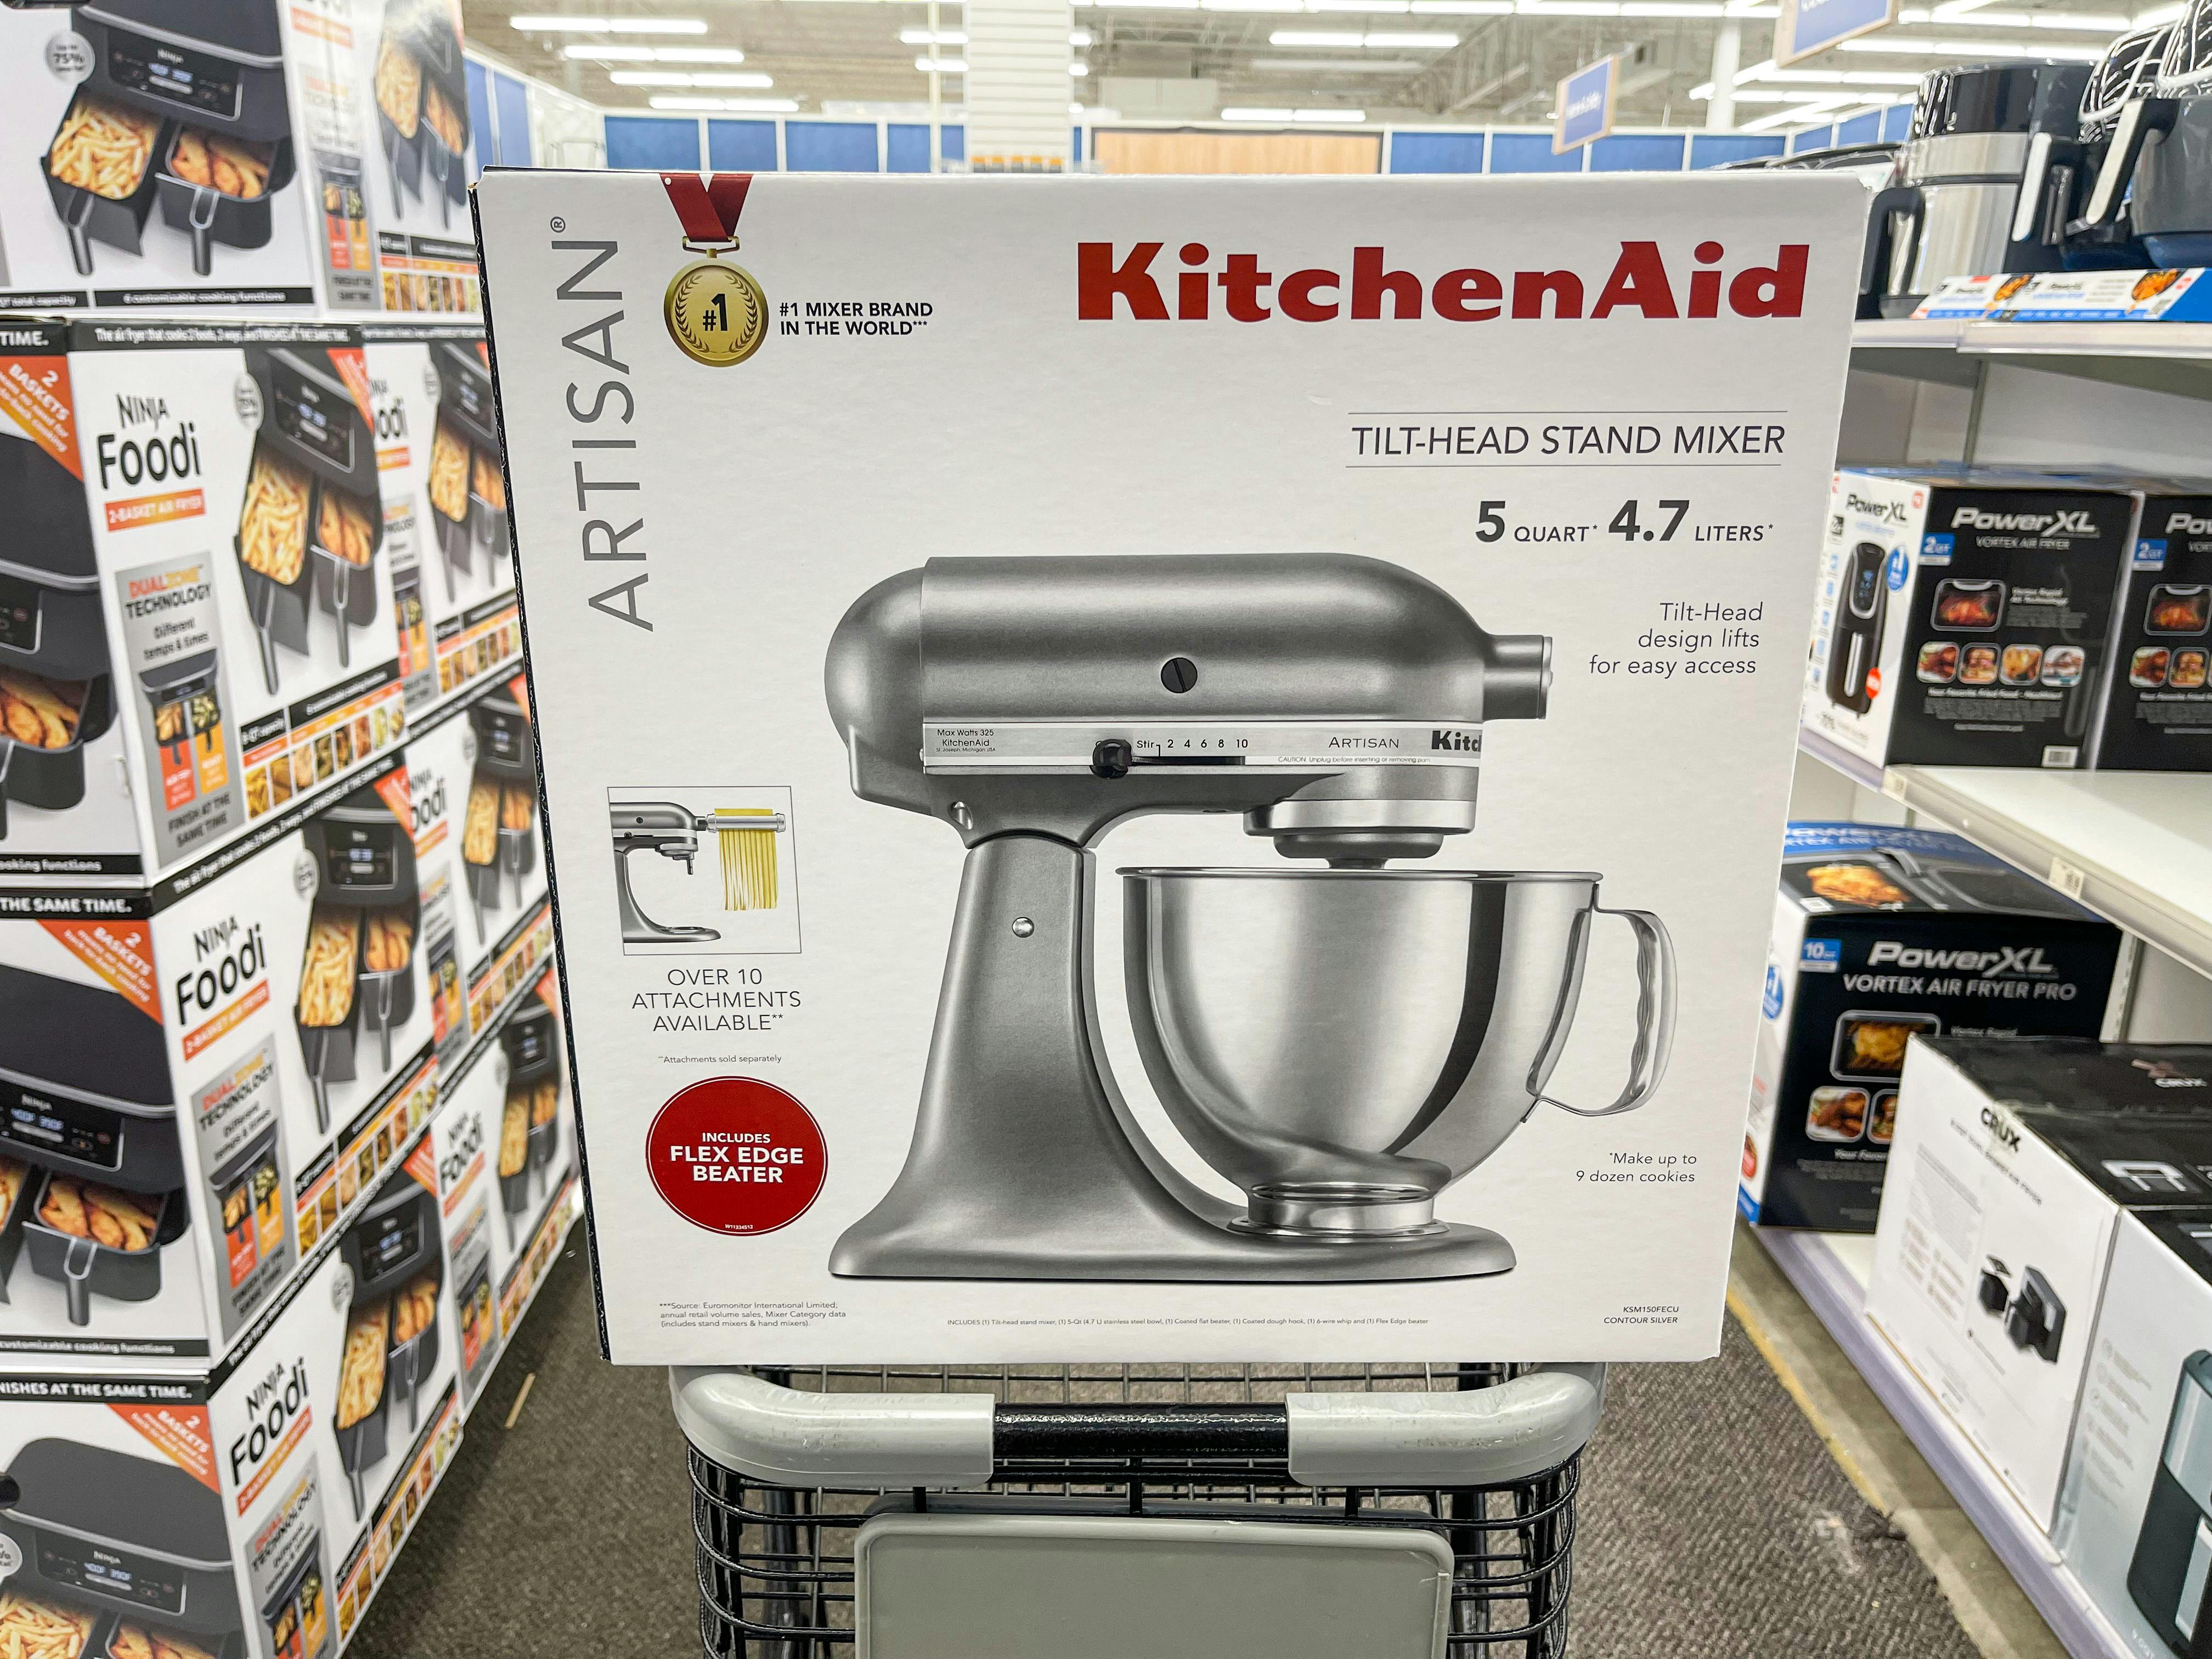 A KitchenAid Stand alone mixer sitting on the edge of a shopping cart.